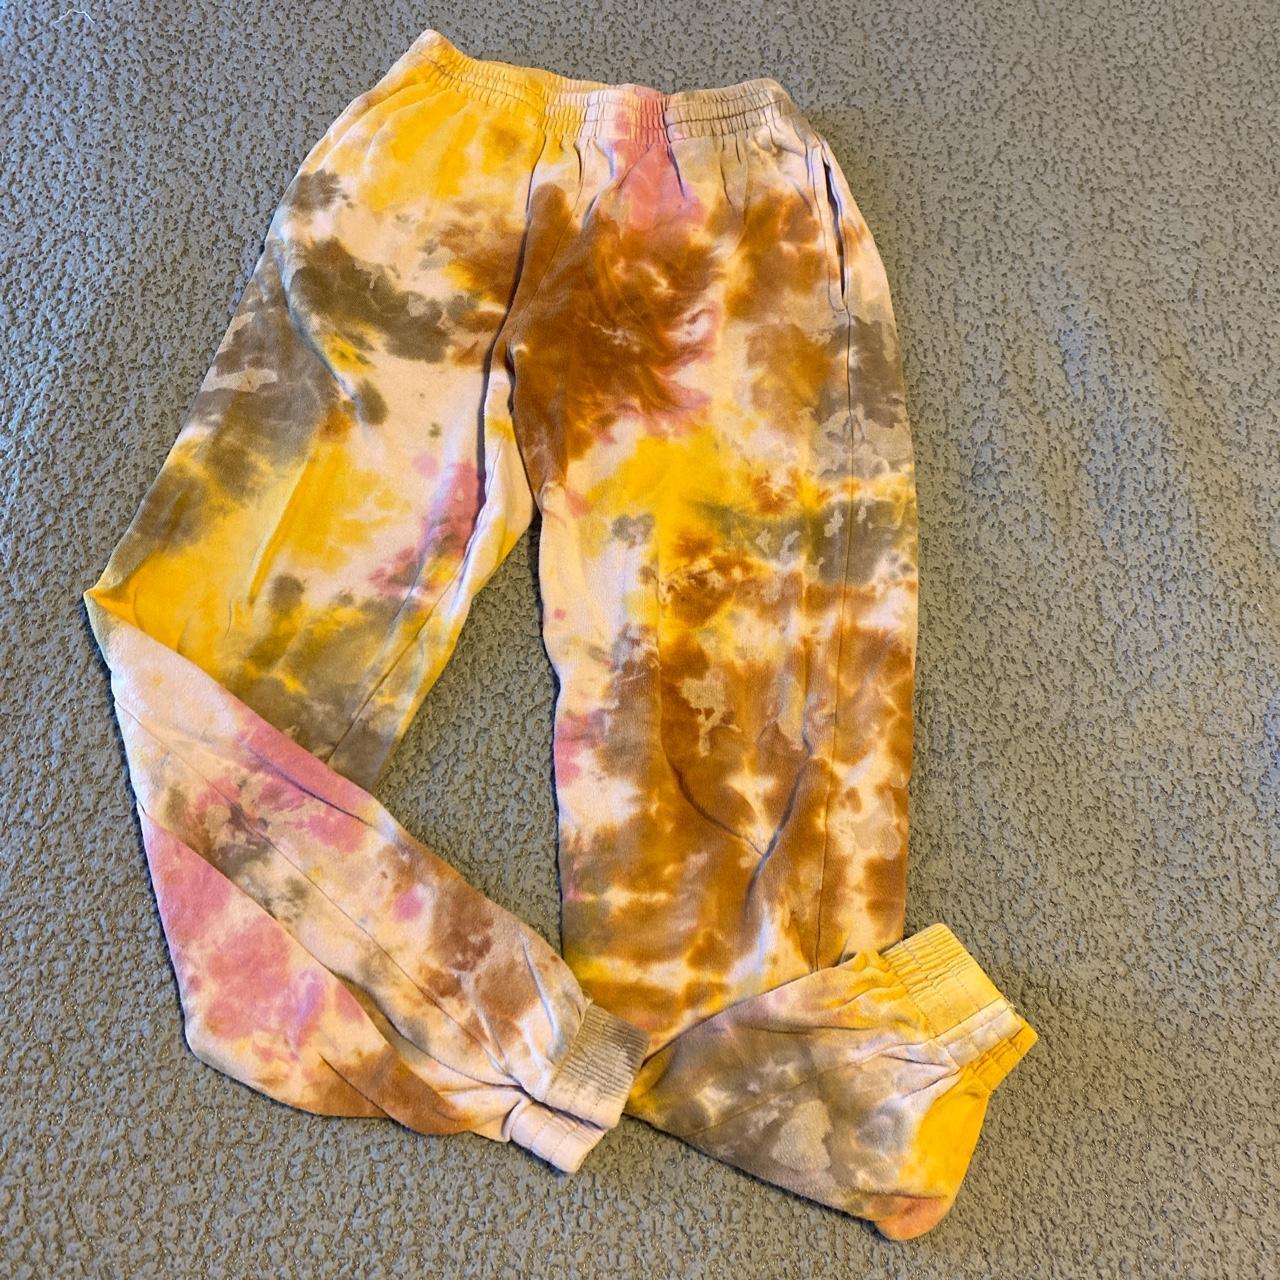 wild fable tie dye sweatpants yellow size small